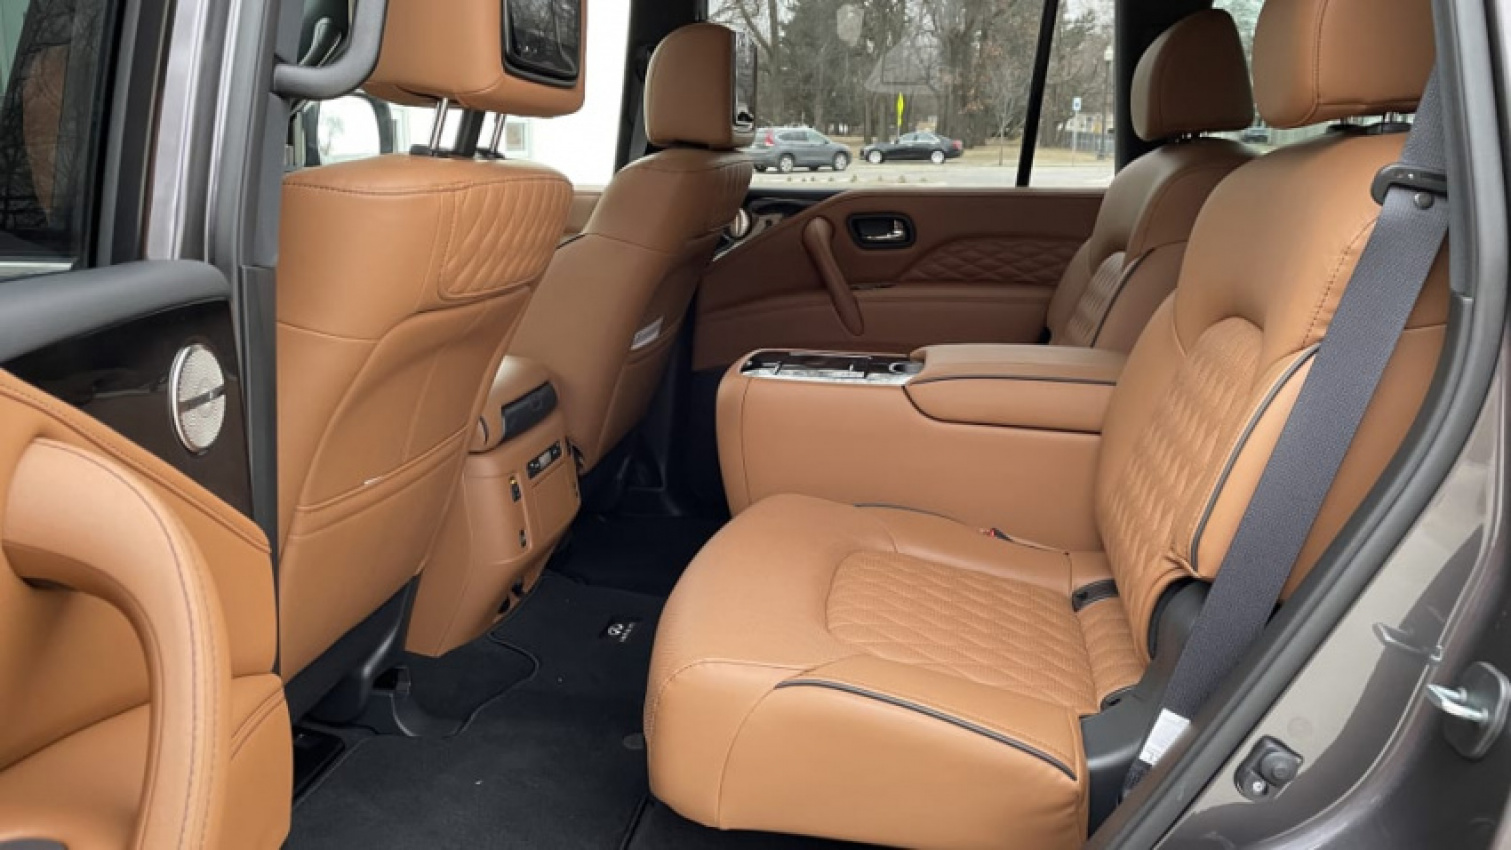 autos, cars, infiniti, android, driveway tests, infiniti qx80, infotainment, luxury, technology, android, 2022 infiniti qx80 interior review | refreshed, but still behind